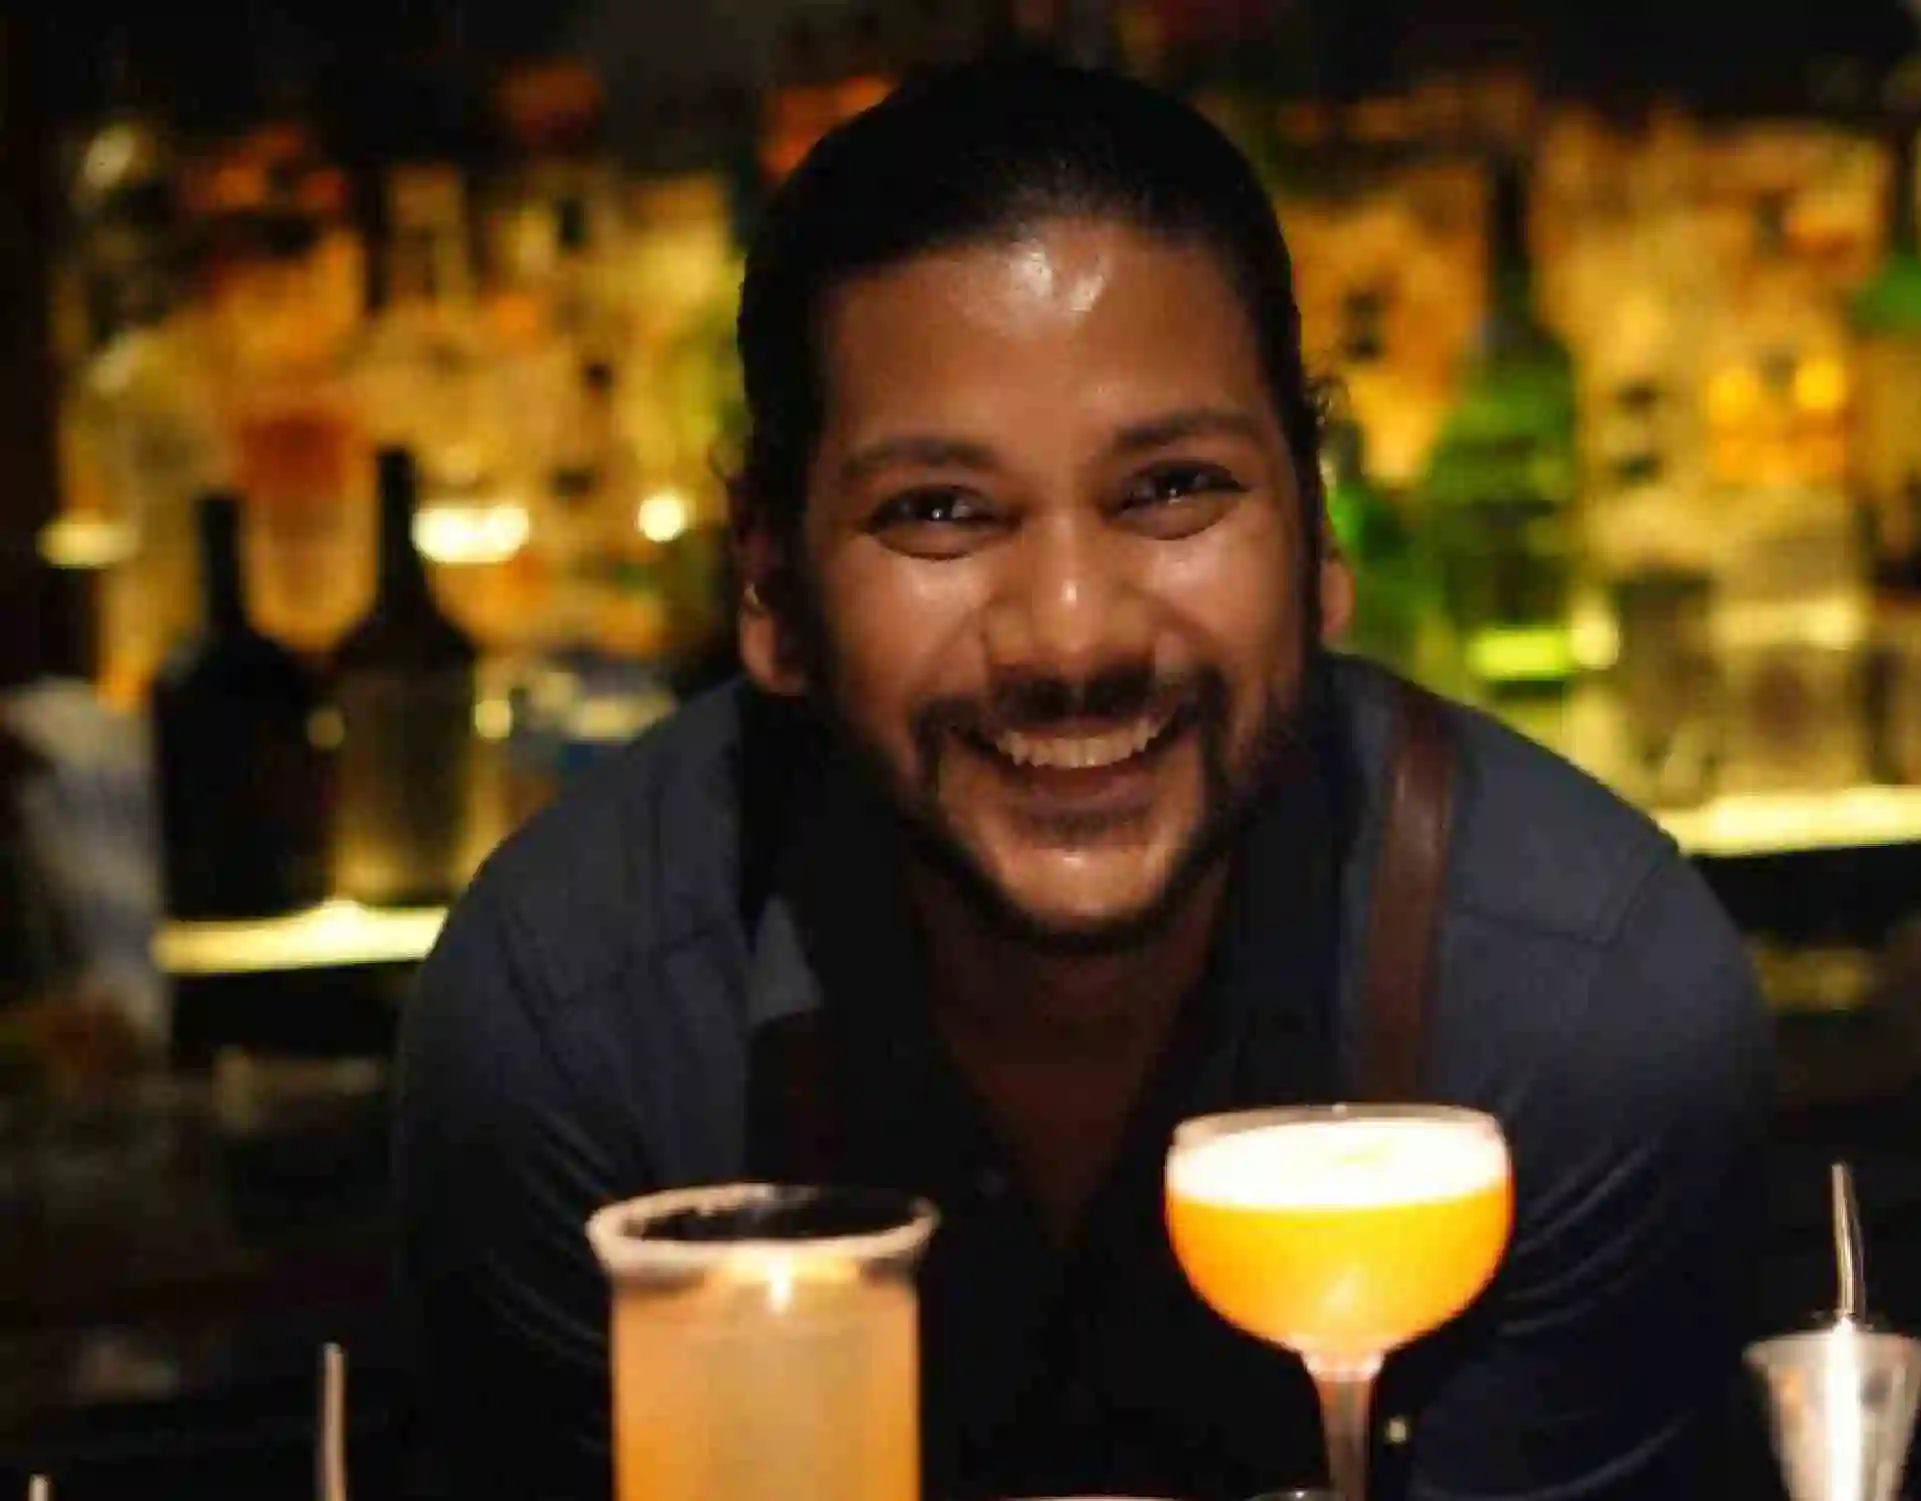 The bartender is seen smiling at the camera with cocktails displayed in front.